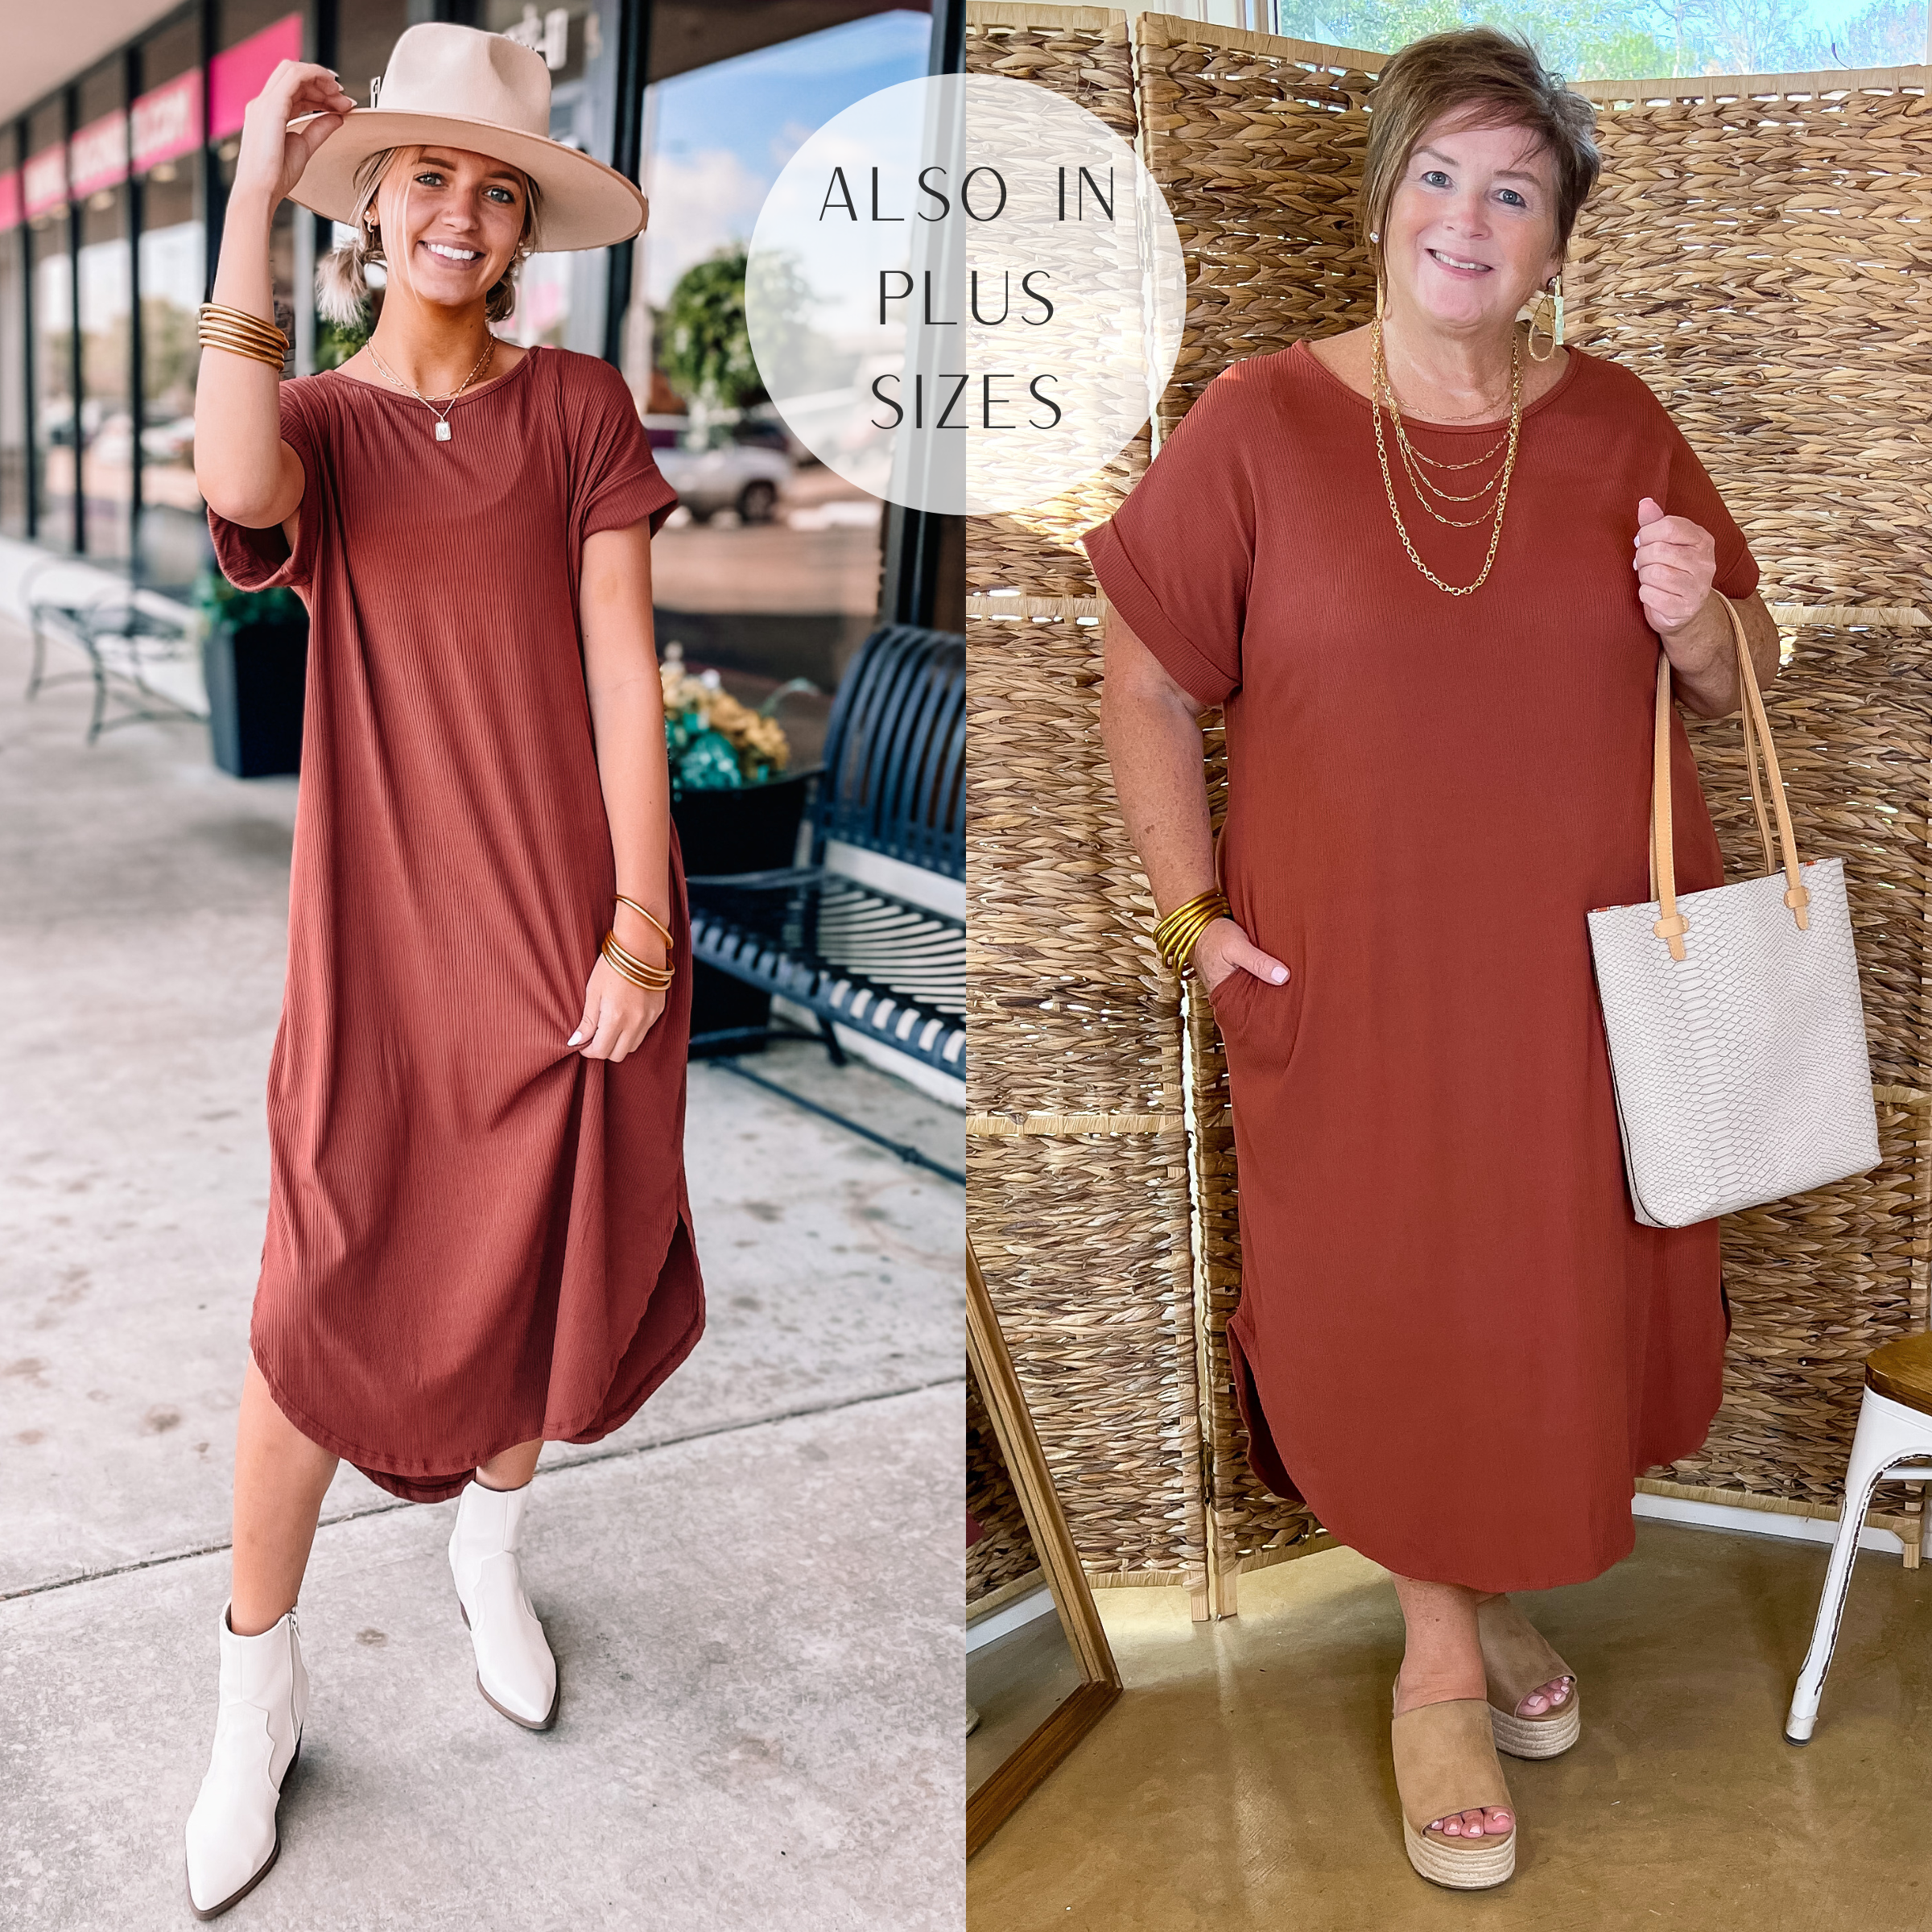 Chill Looks Short Sleeve Thin Ribbed Midi Dress in Cinnamon Red - Giddy Up Glamour Boutique